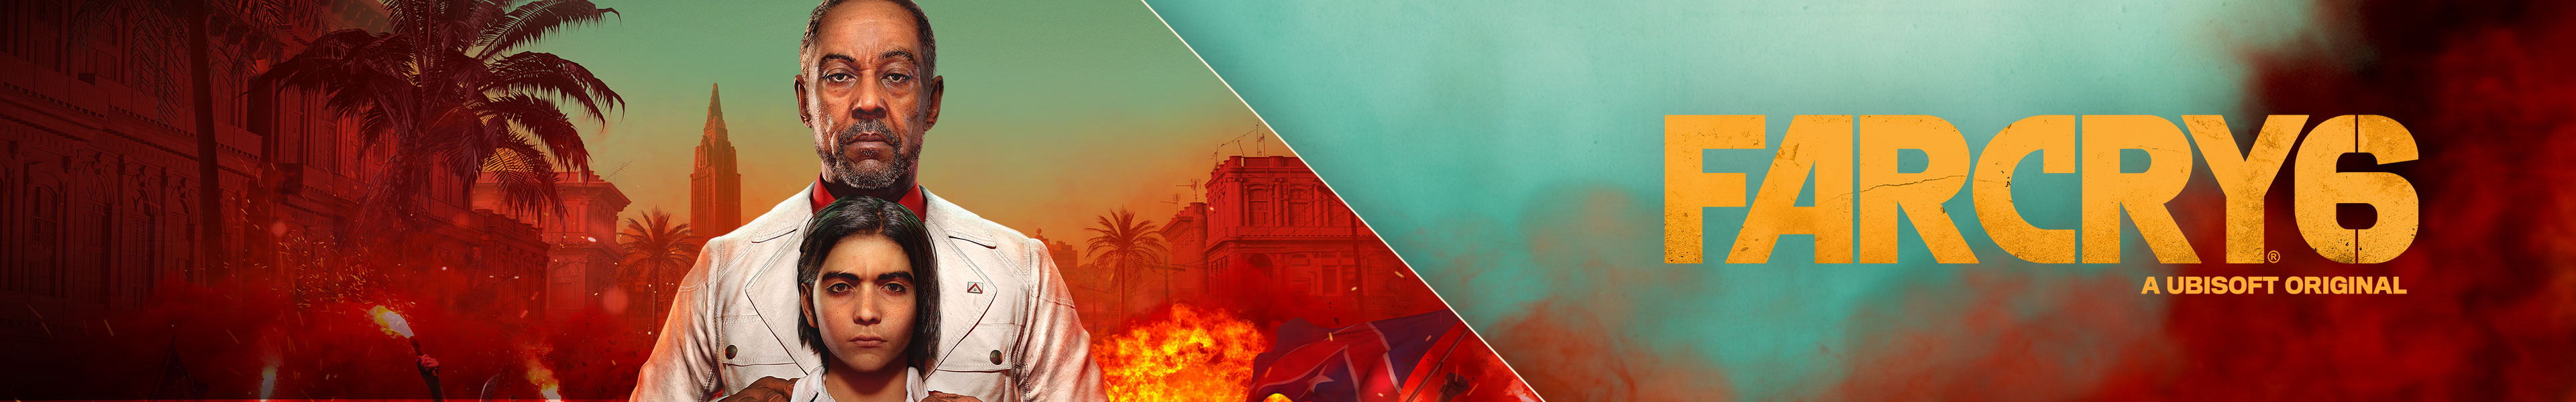 Far Cry 6 Category banner